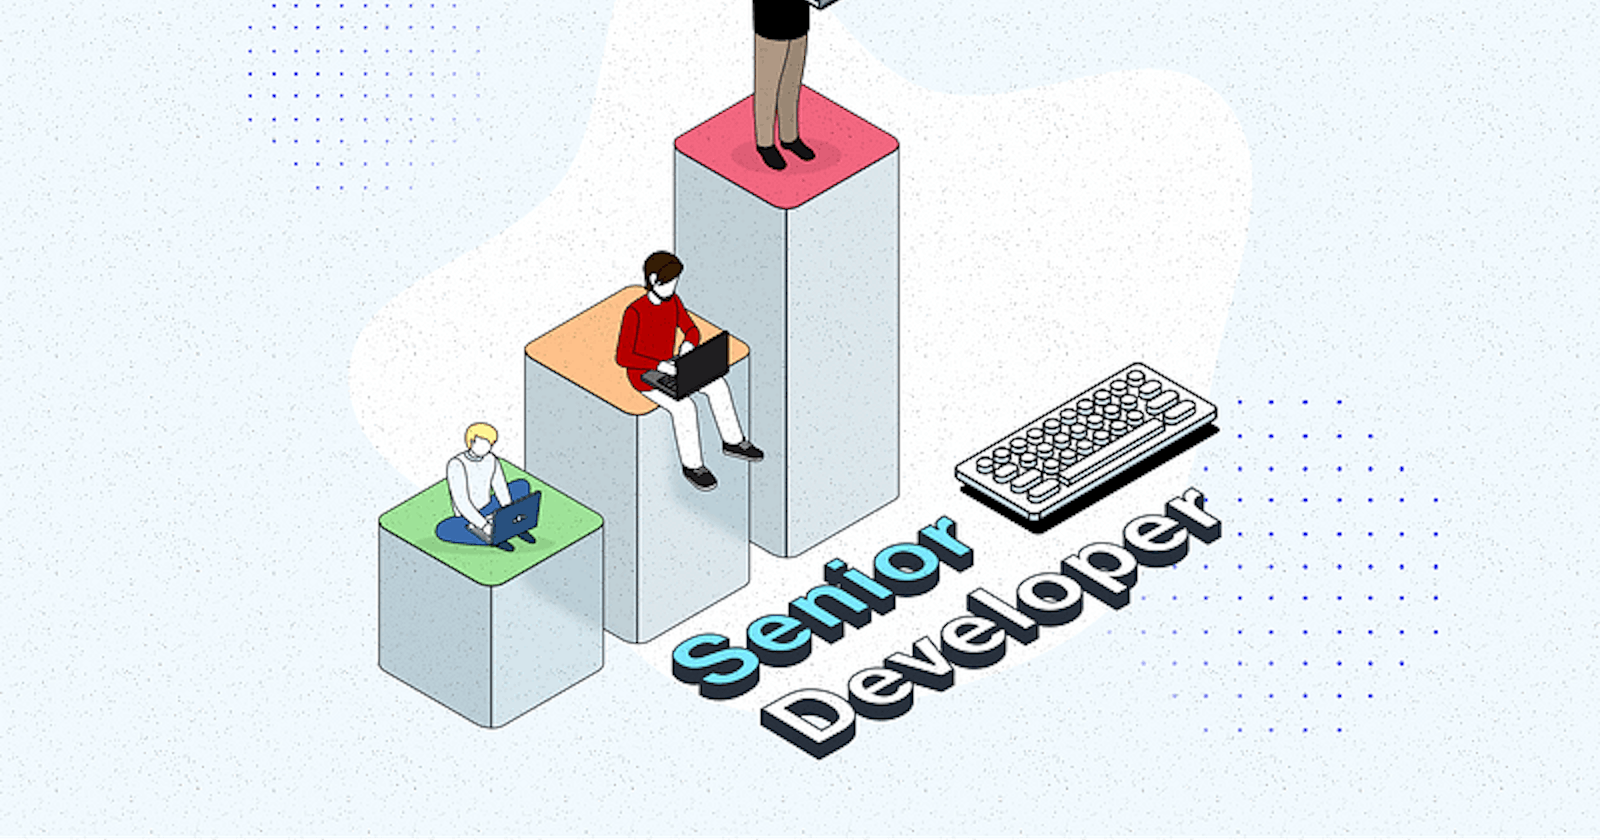 5 Practical Tips to Work Like a Senior Developer and Advance Your Career